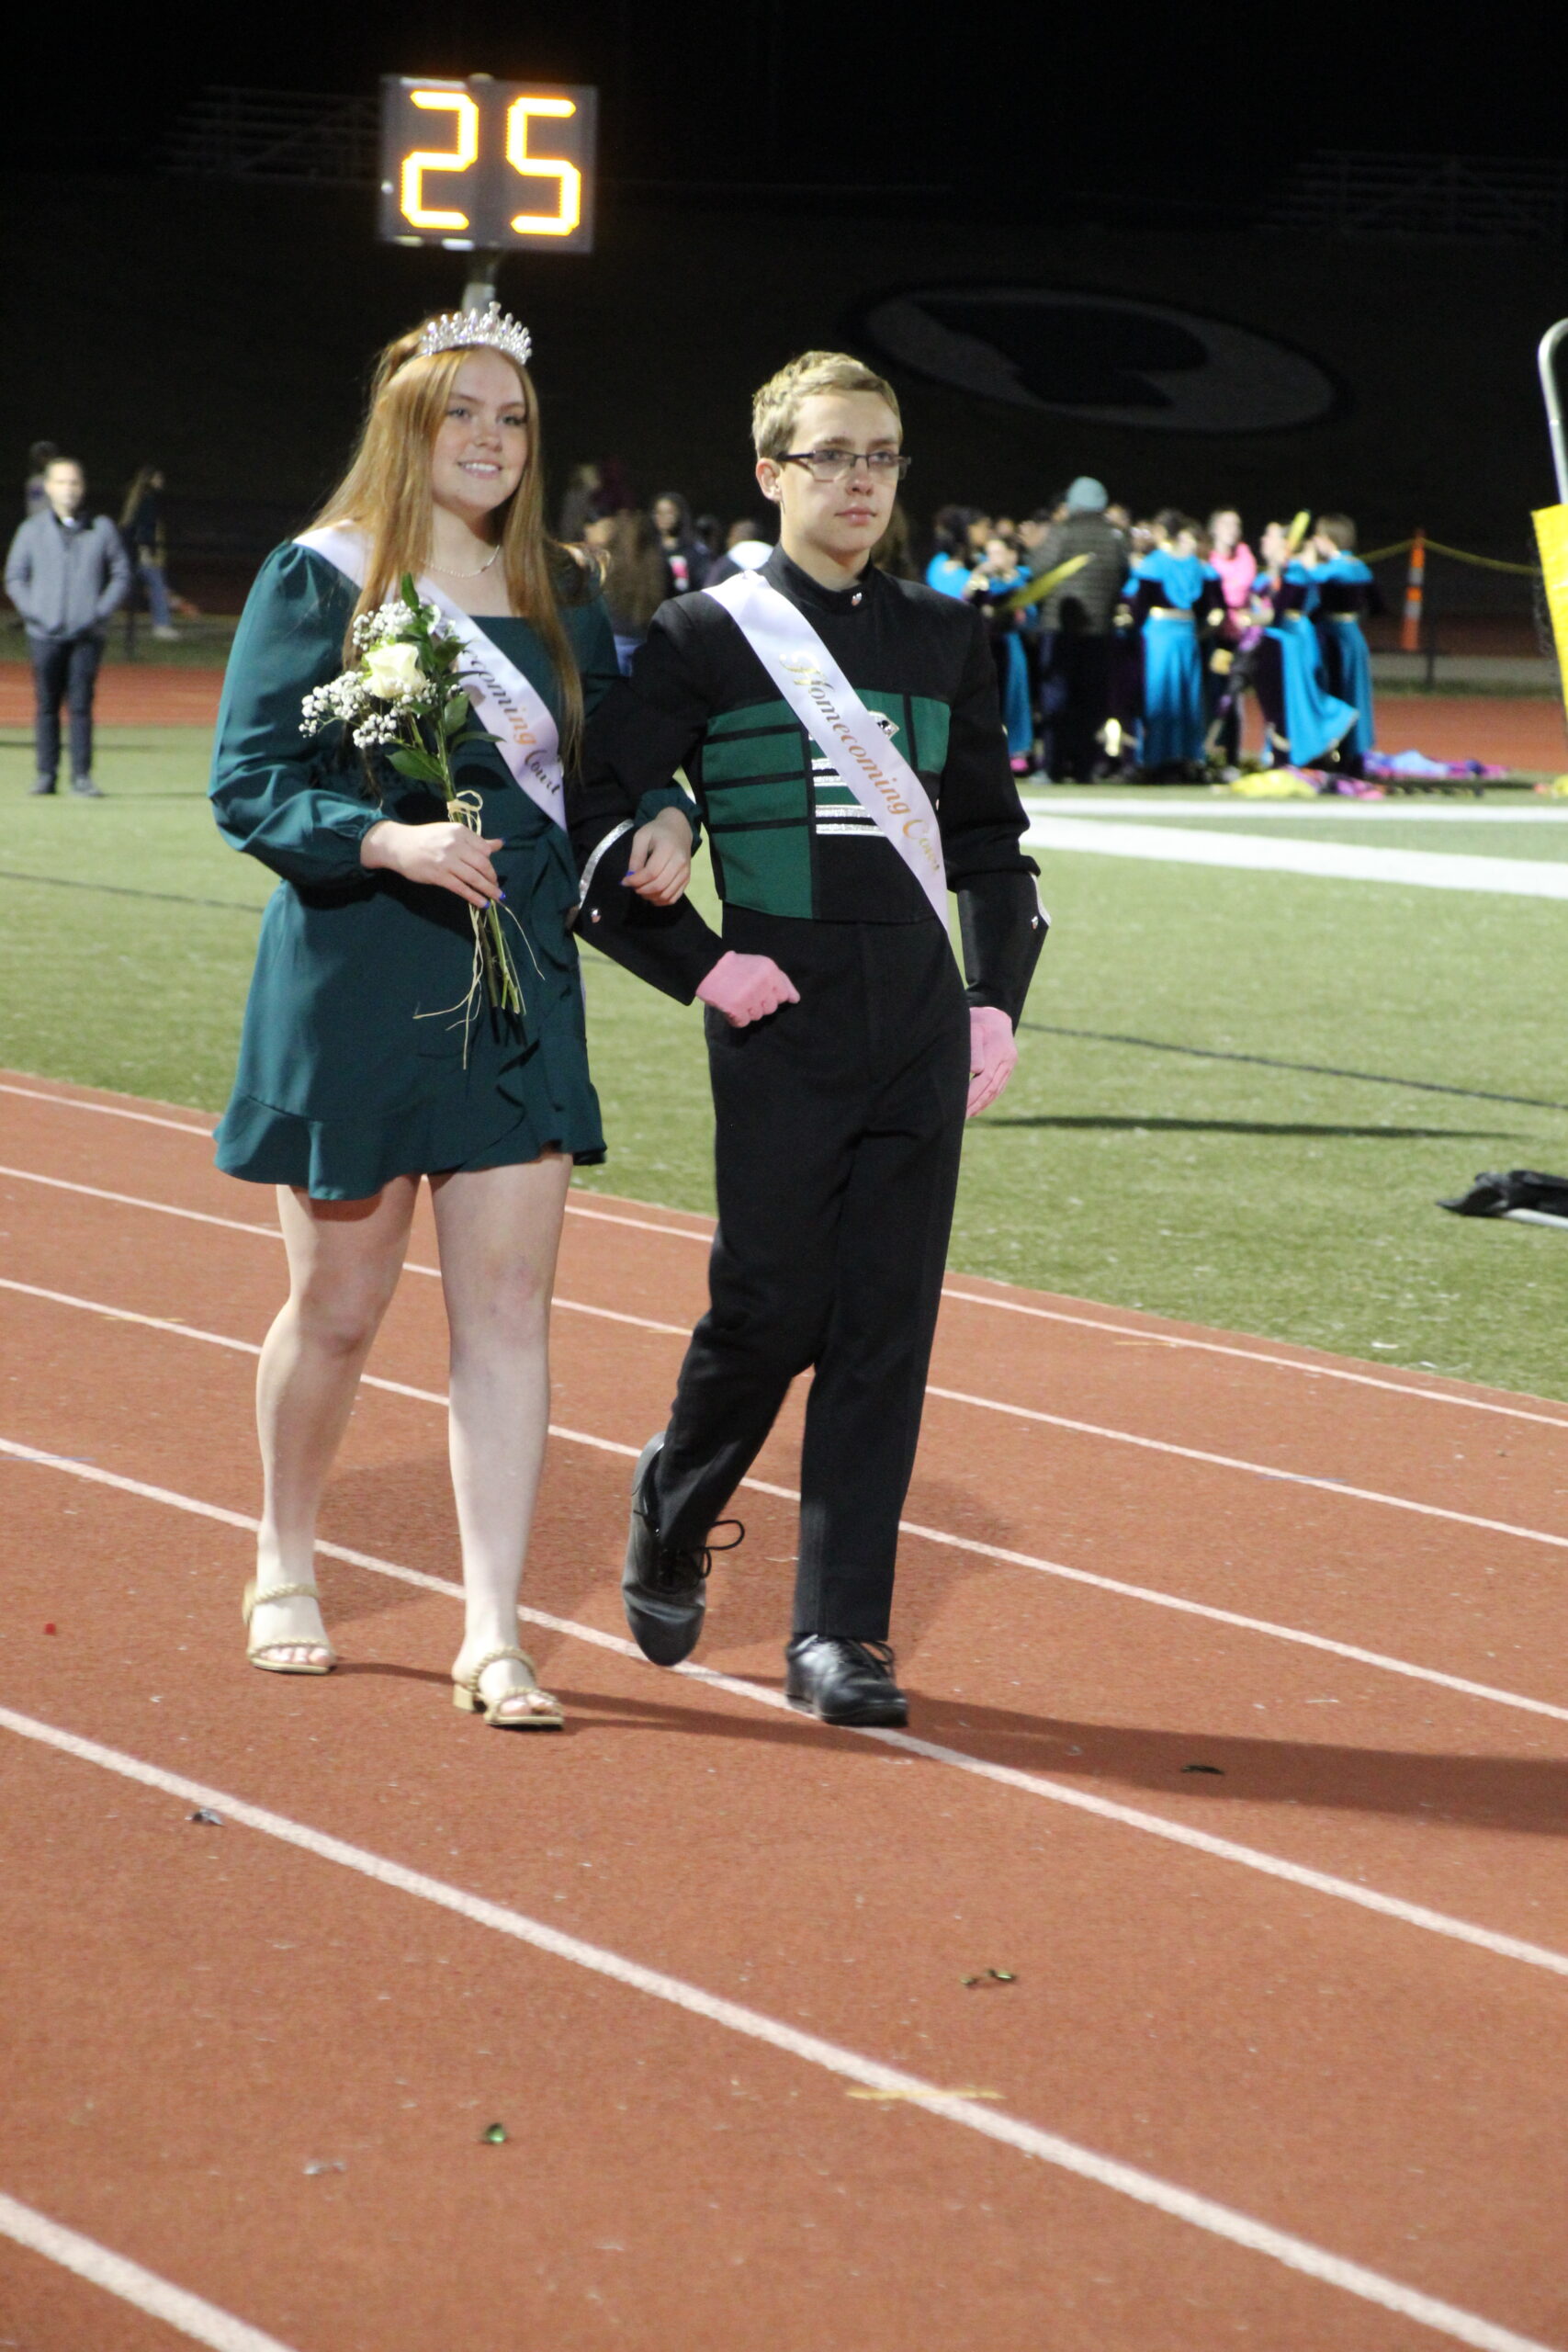 With Joey Stewarts heavy involvement in the band, it led him to be voted onto homecoming court last fall.